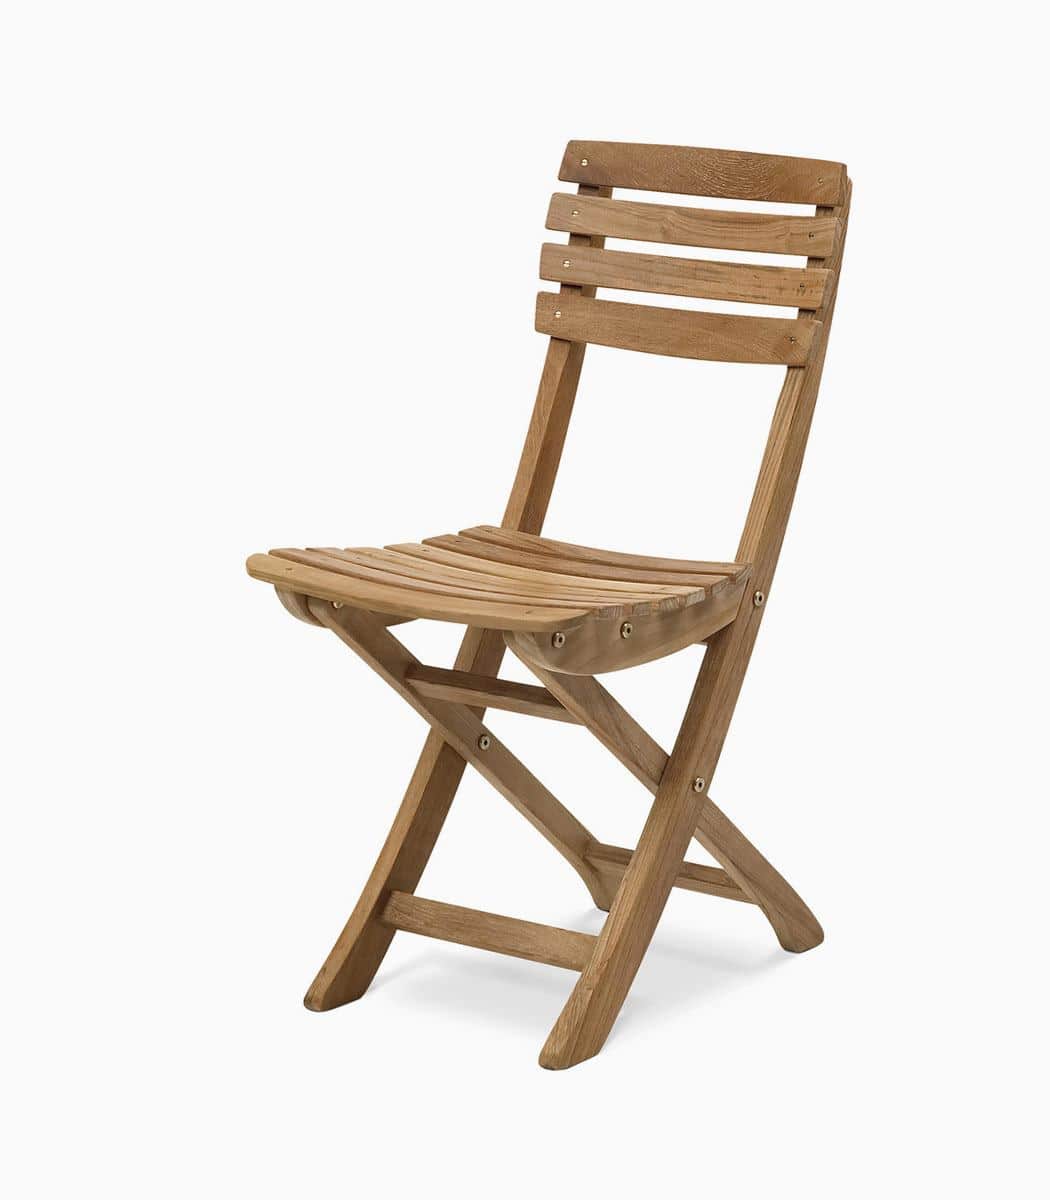 classic wooden chair 1 1